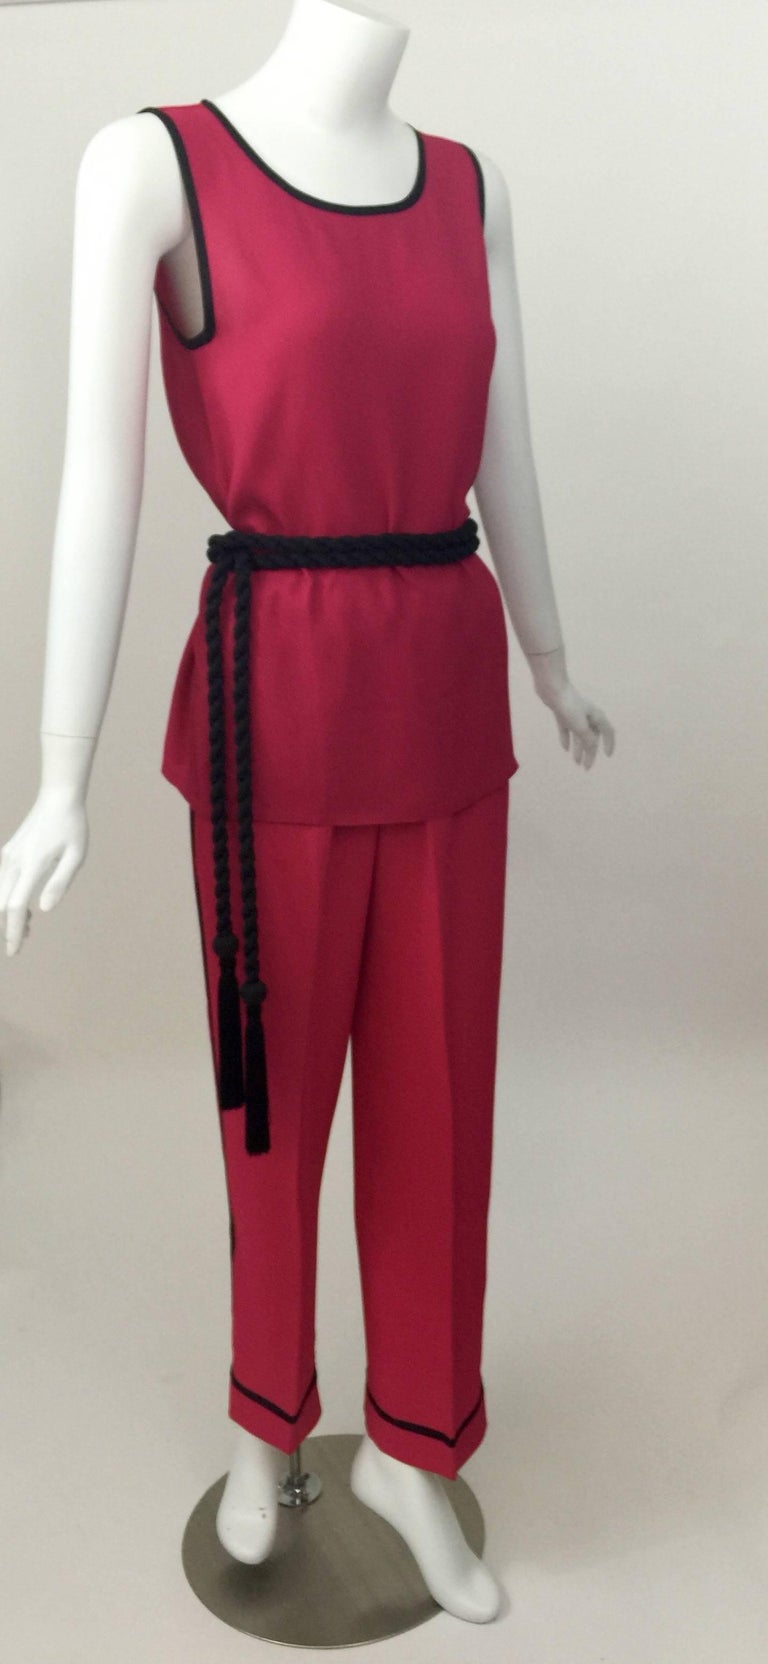 This is a super chic three piece set from Saint Laurent.
The color is shocking pink, and I love the subtle Two-Tone color. The top is a deeper shade of pink and the pants are a slightly brighter tone. 
The fabric is a lightweight crepe.

The top is